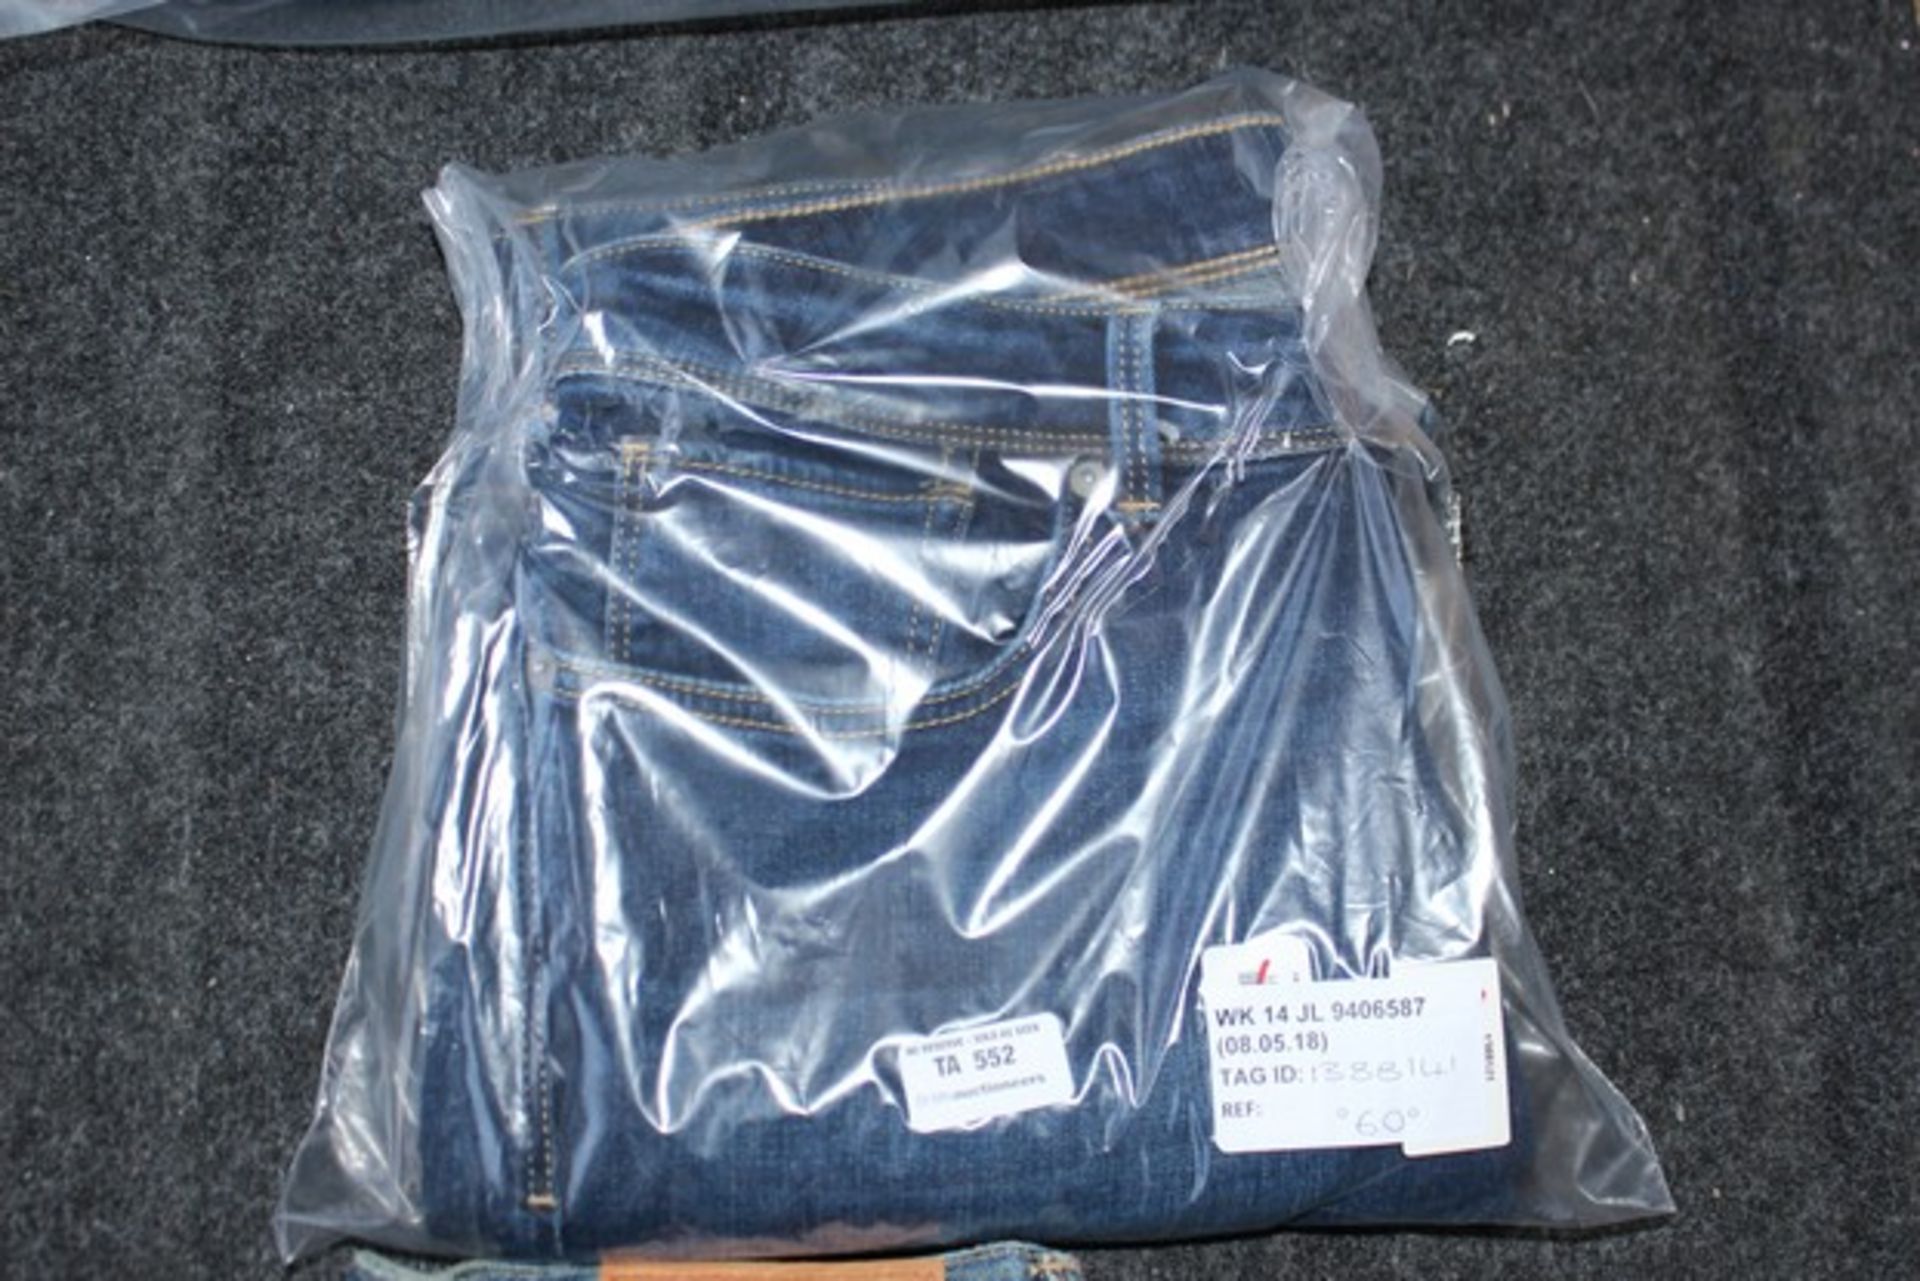 1X PAIR OF SELECTED HOMME JEANS SIZE 34R RRP £60 (08.05.18) (1388141)